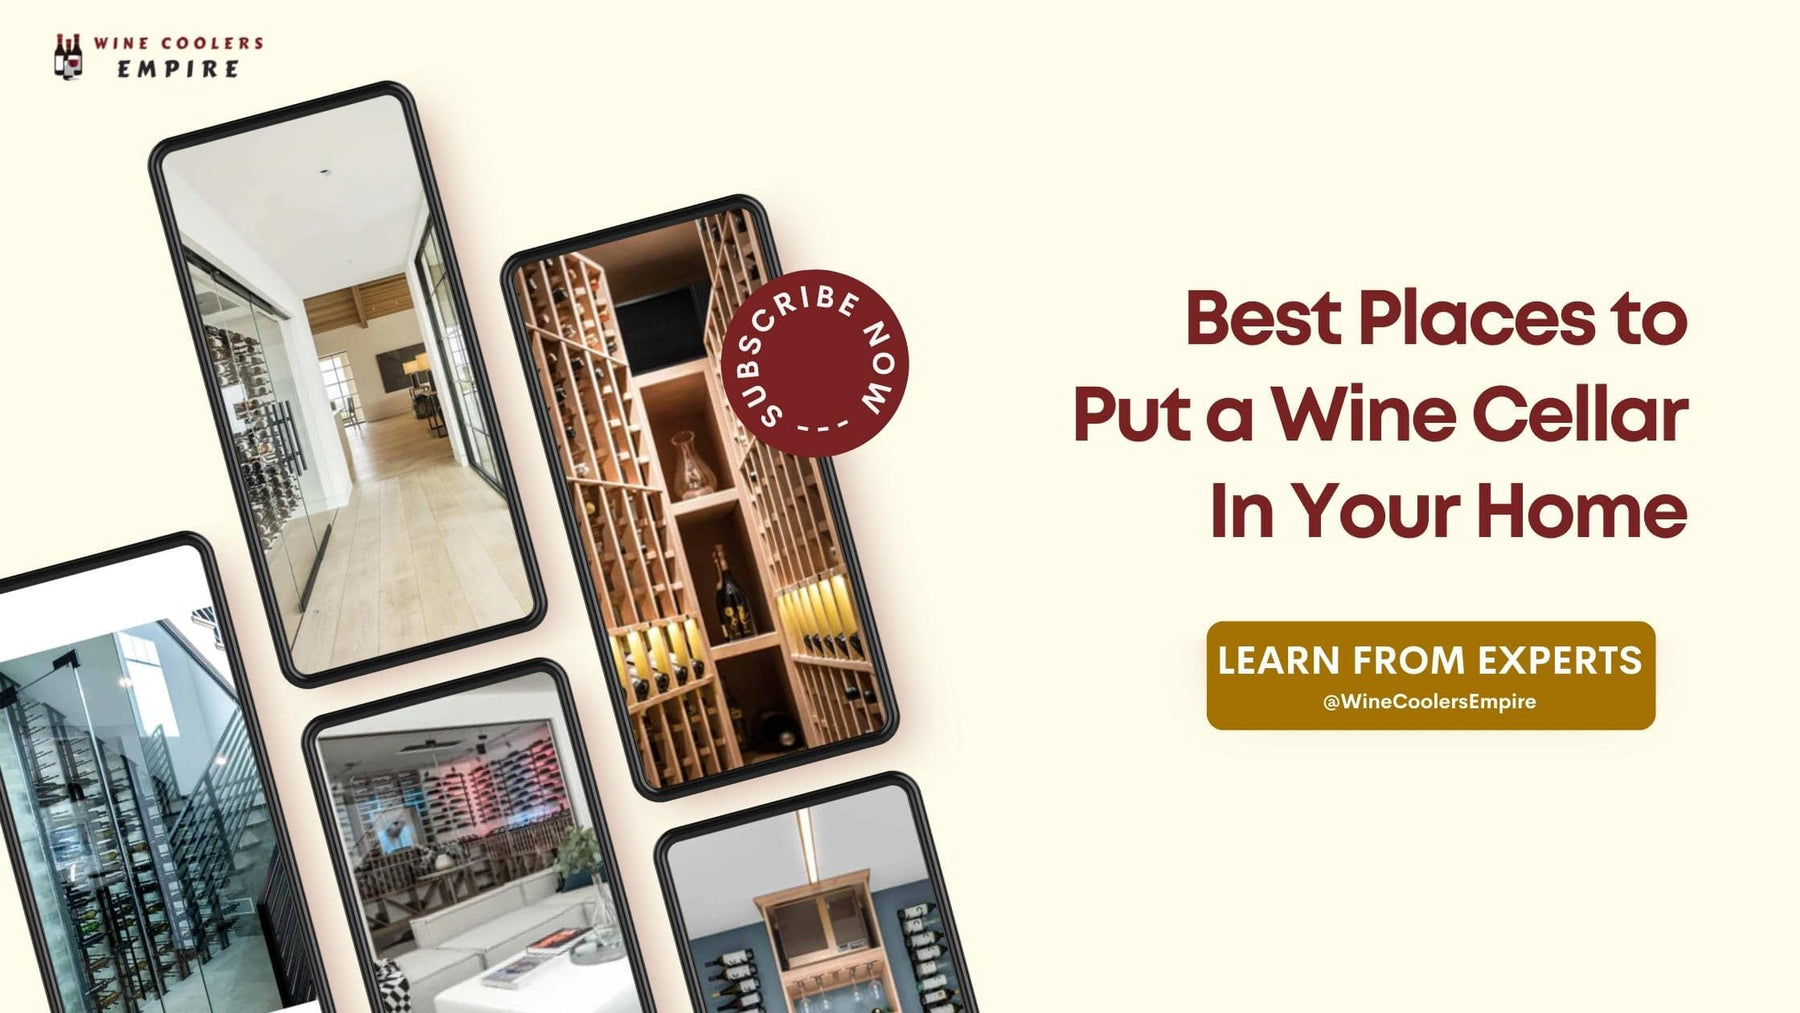 Best Places to Put a Wine Cellar in Your Home - Wine Coolers Empire